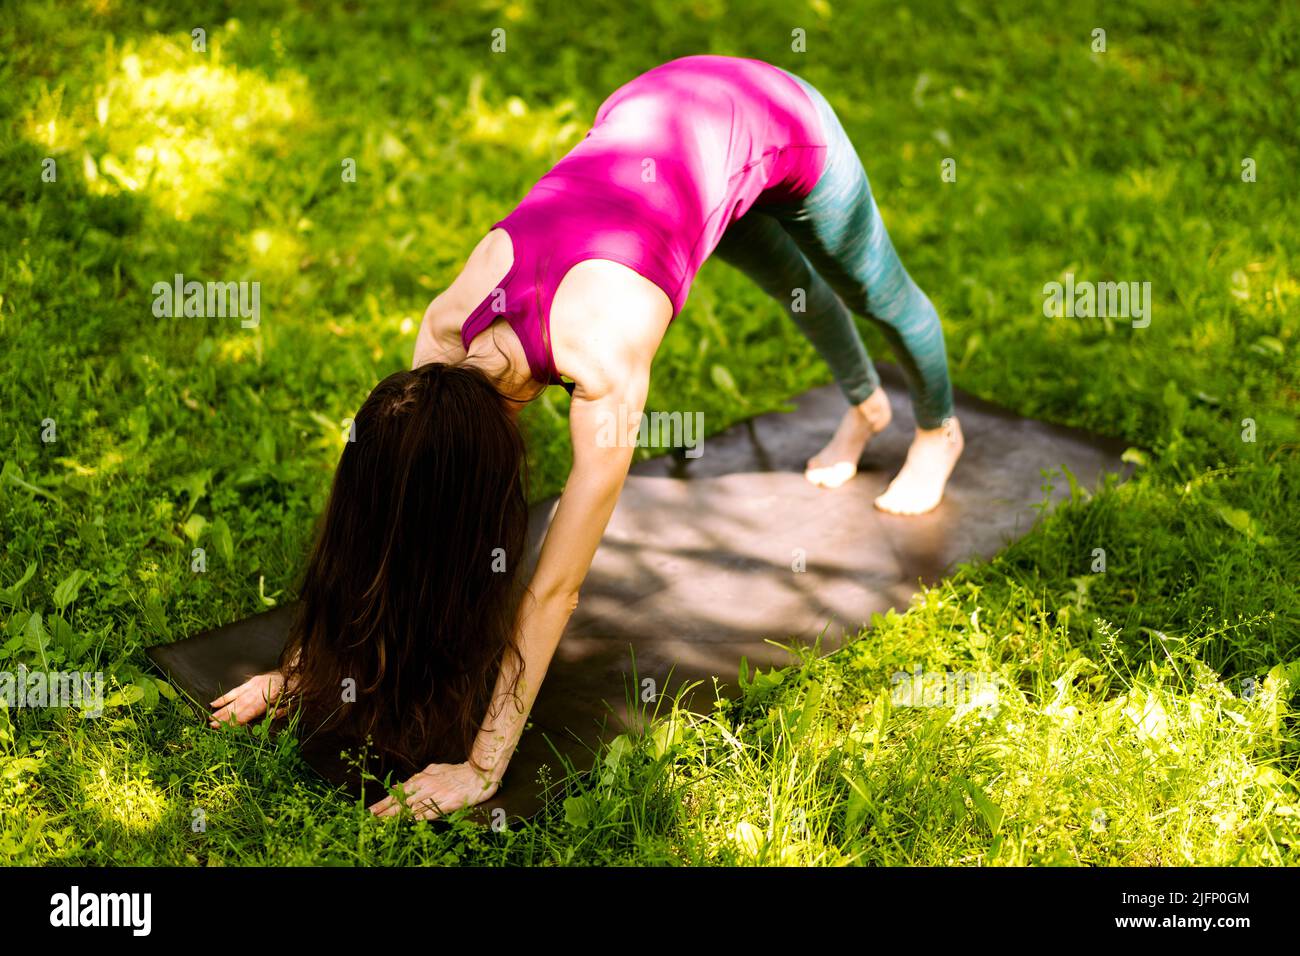 Beautiful young woman practices yoga asana eka pada Adho Mukha Shvanasana. The girl is dressed in a sporty red top and leggings.  Stock Photo